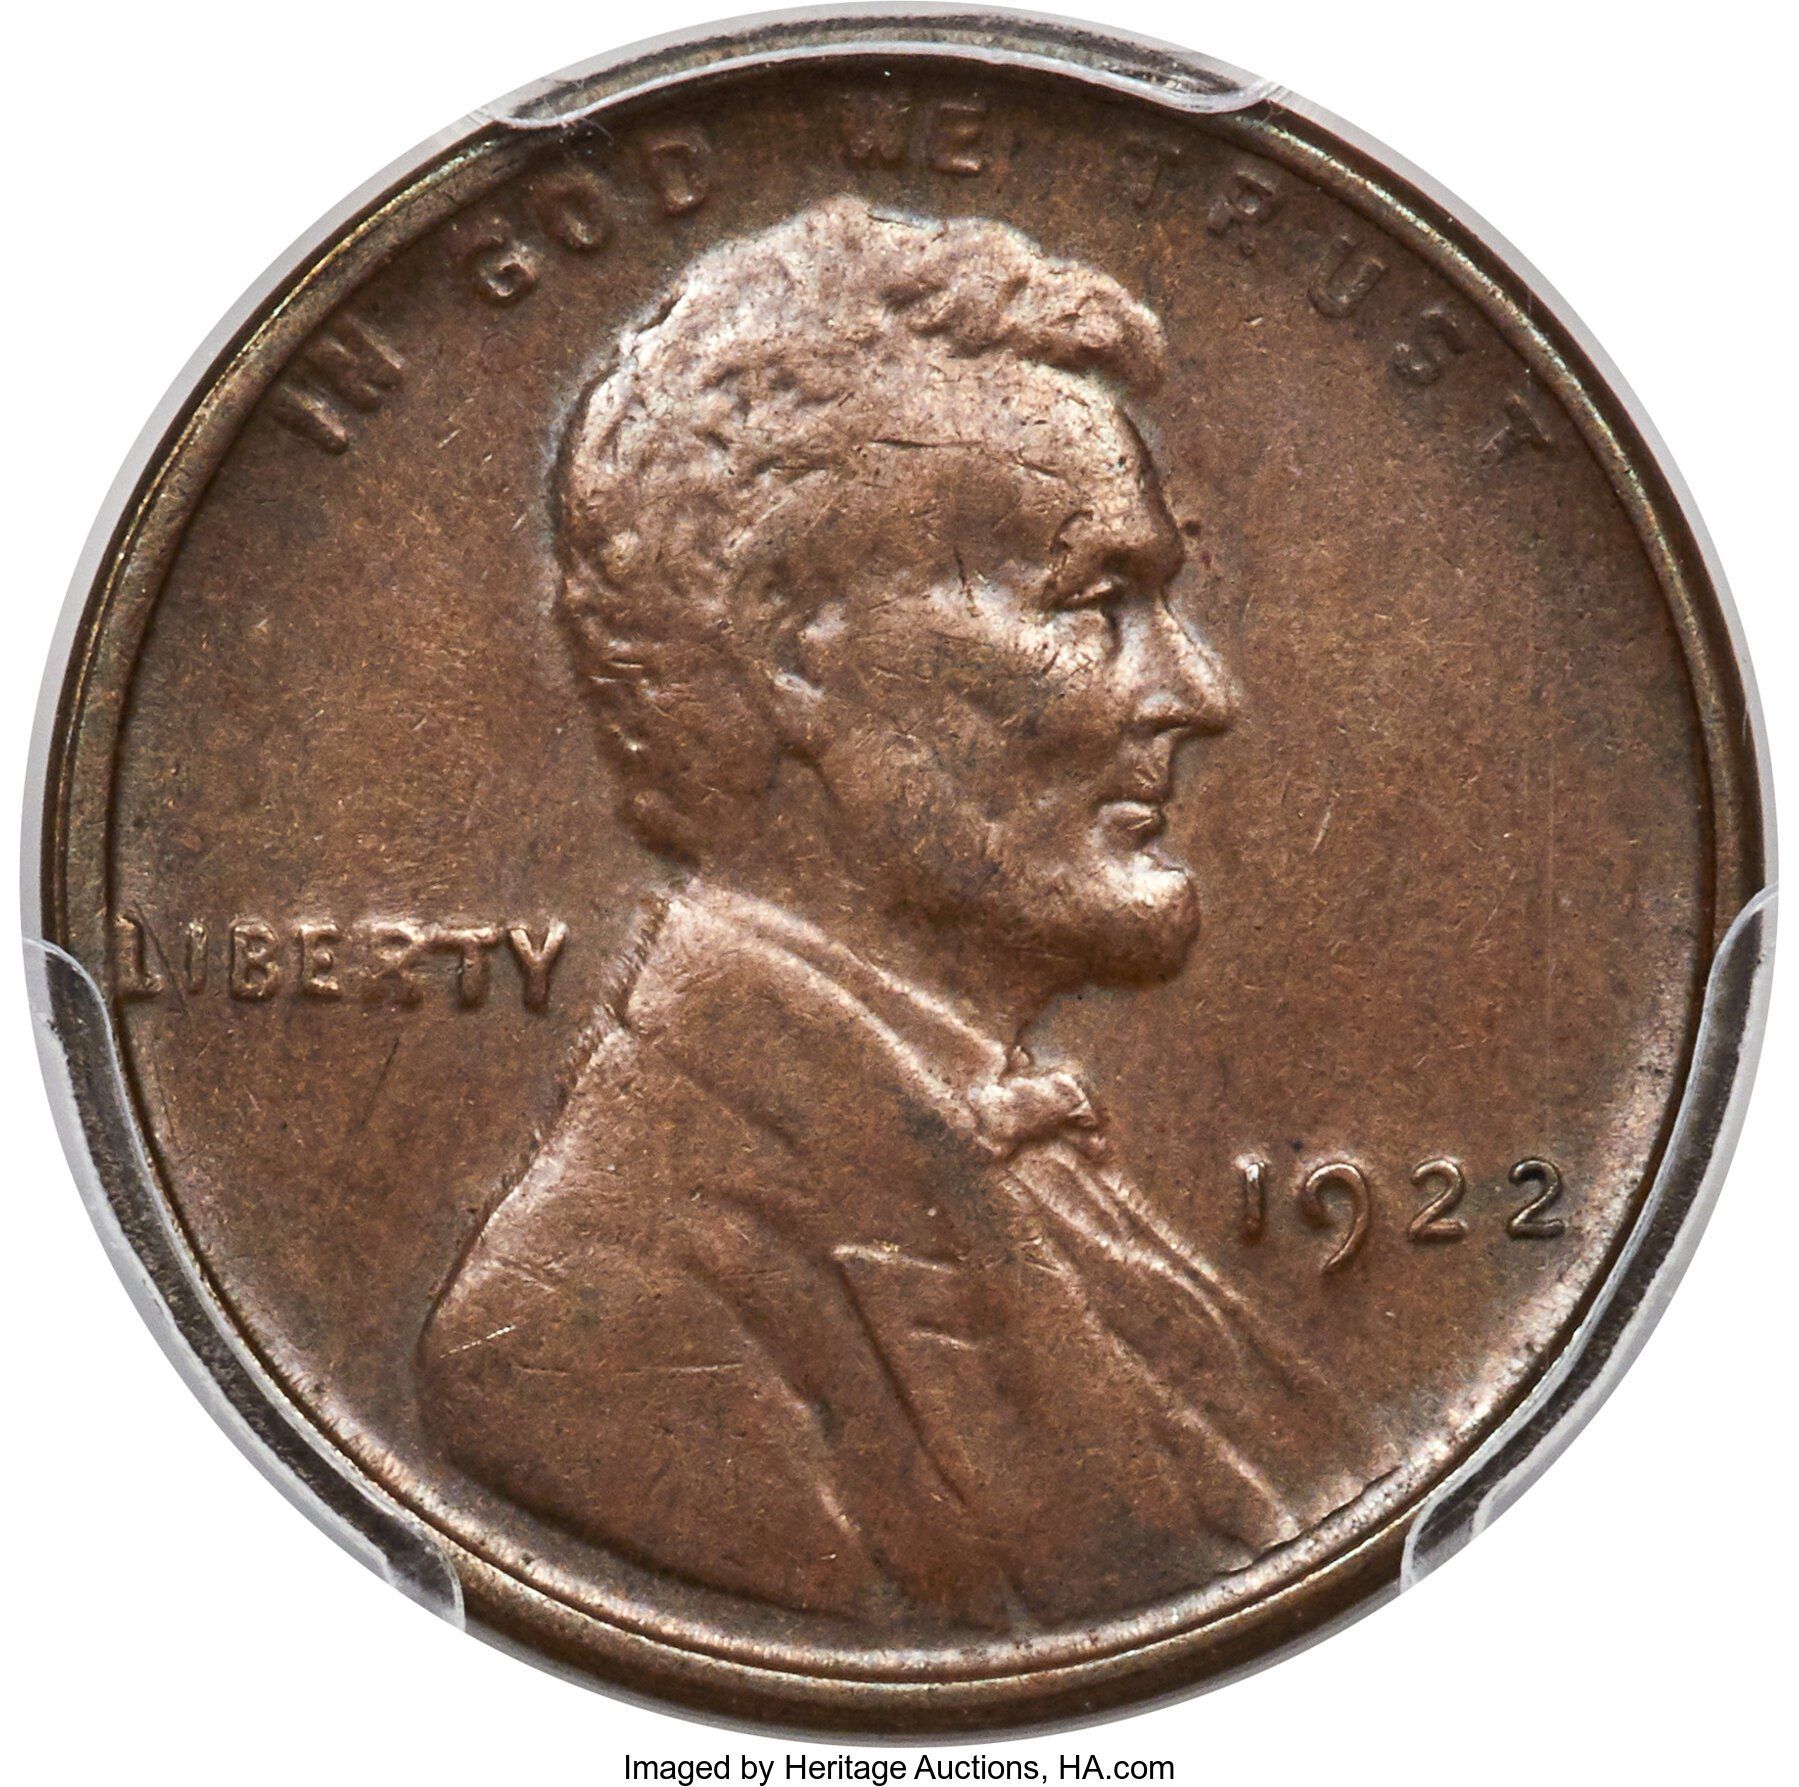 1922-d no d lincoln wheat cent. Imaged by Heritage Auctions, HA.com